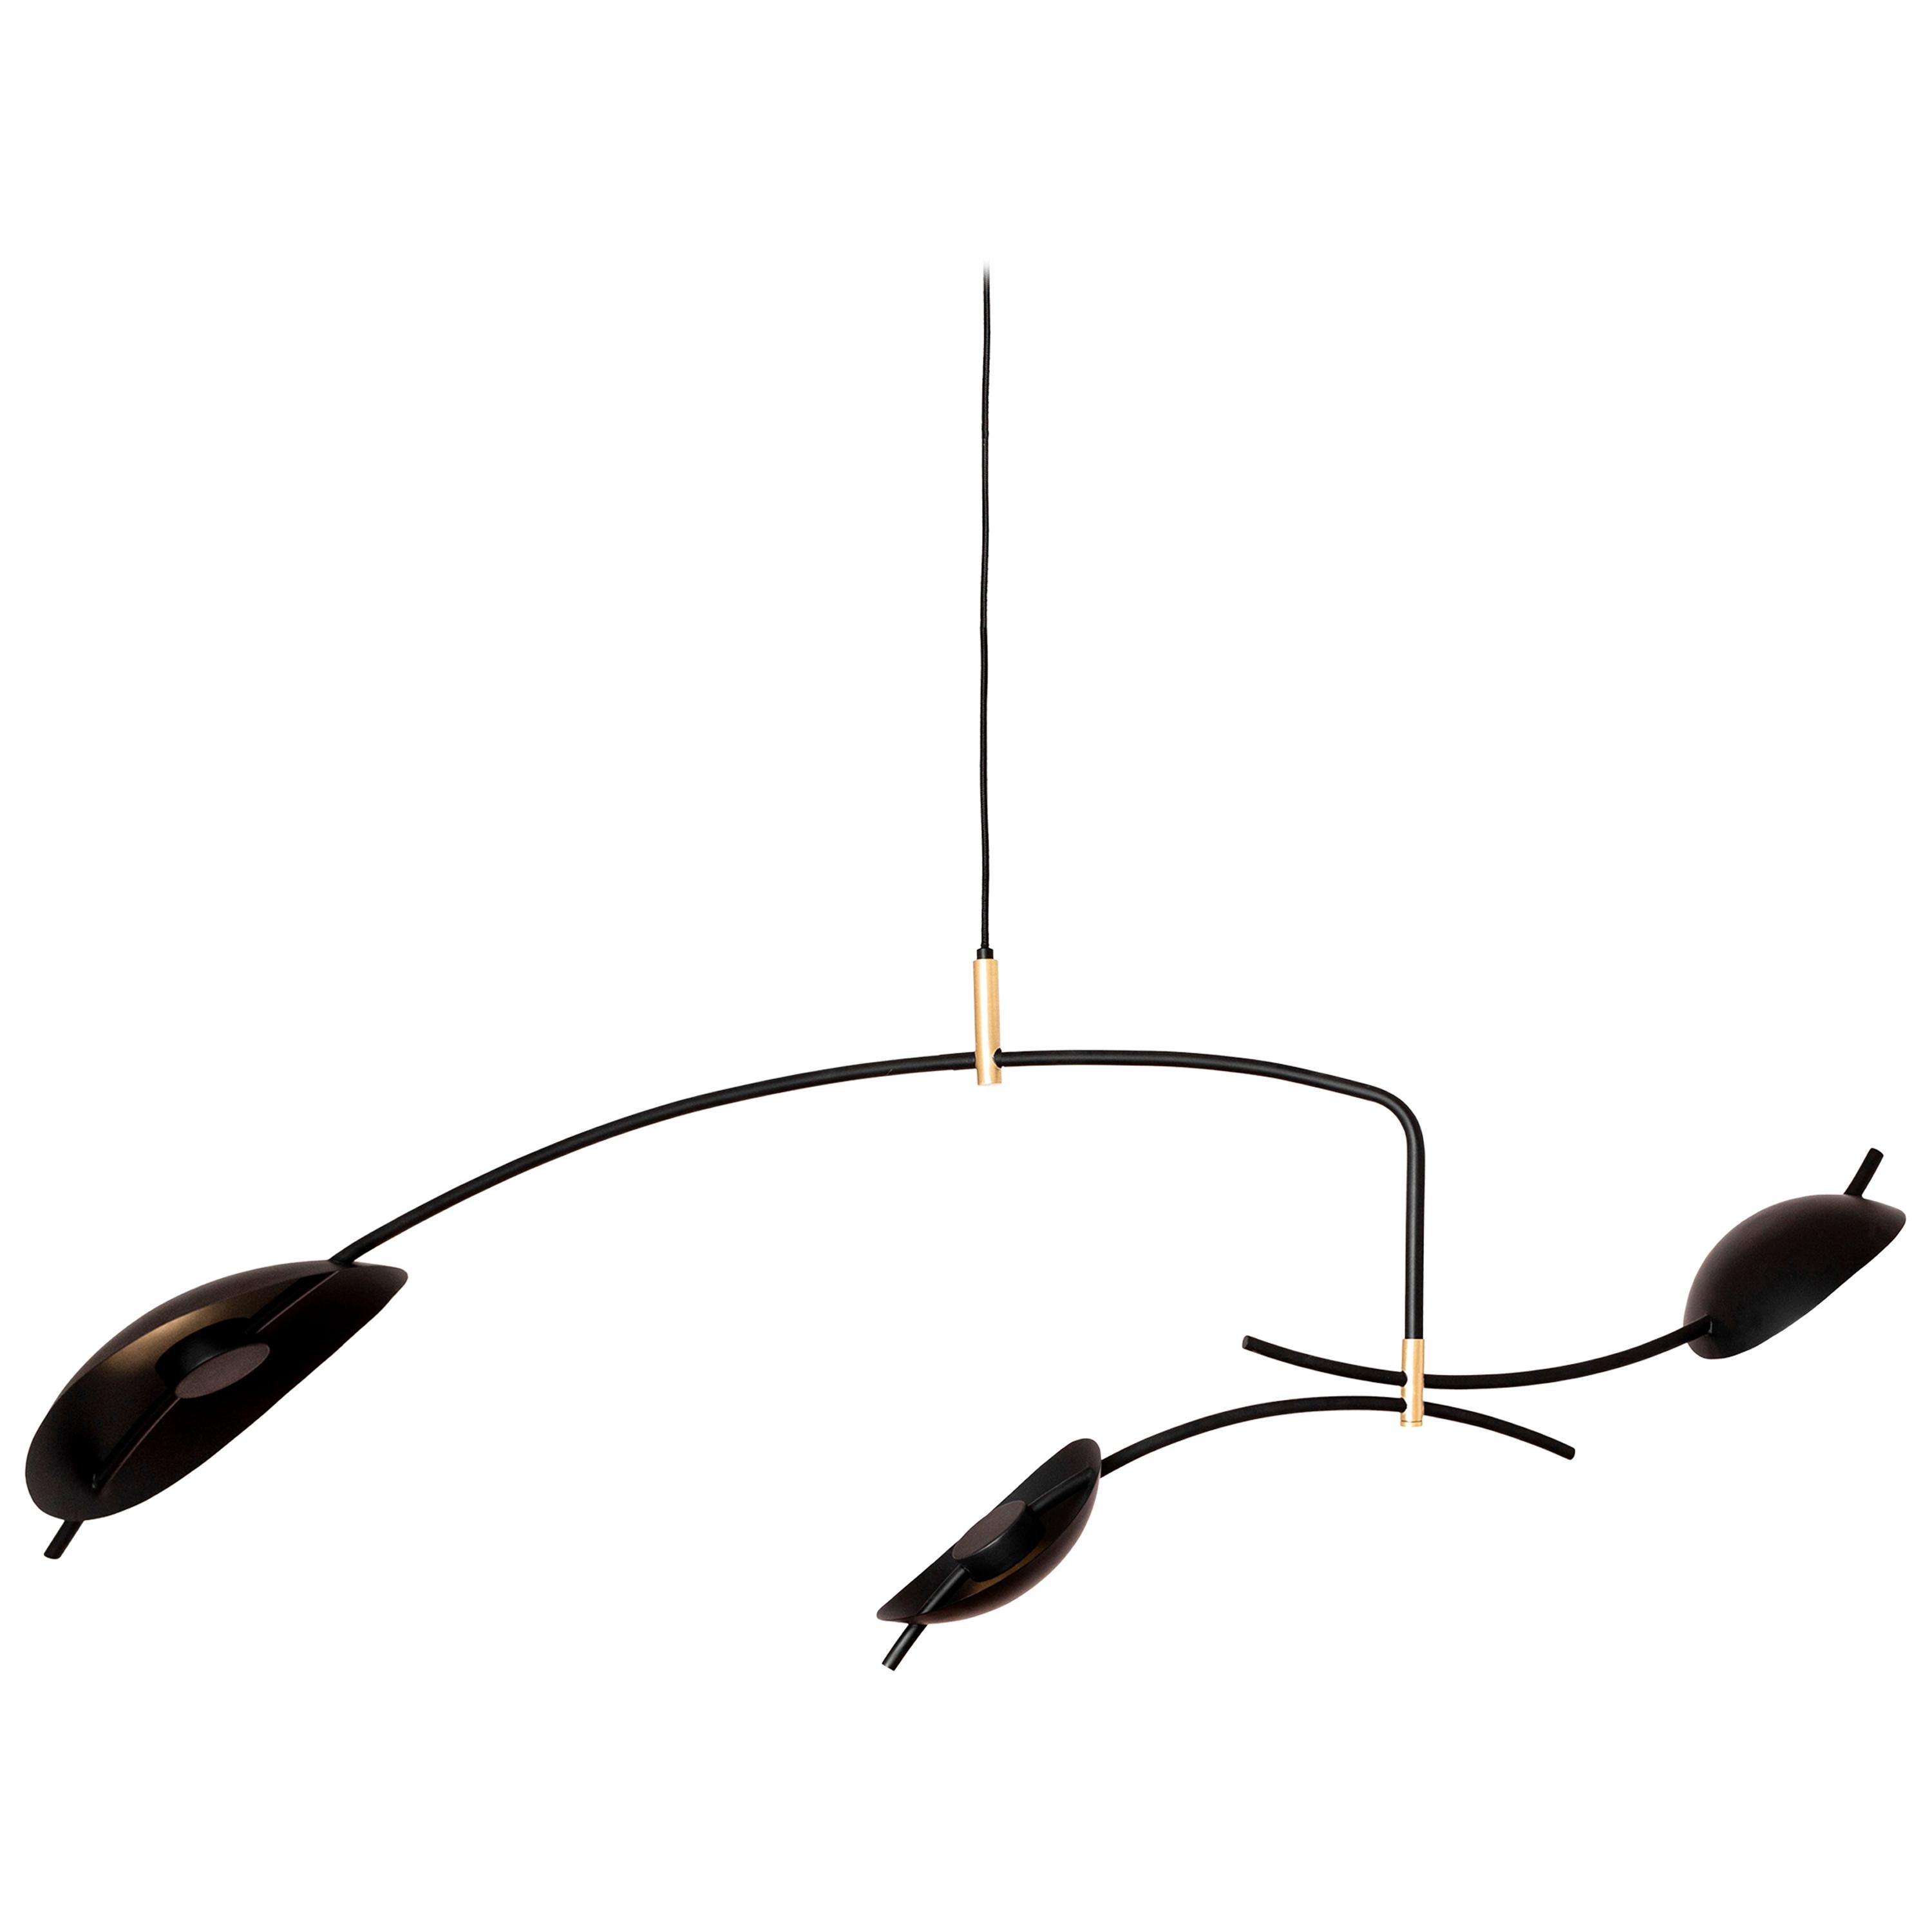 ESPIGA MOBILE-LAMP , Lighting Sculpture by Rebeca Cors For Sale